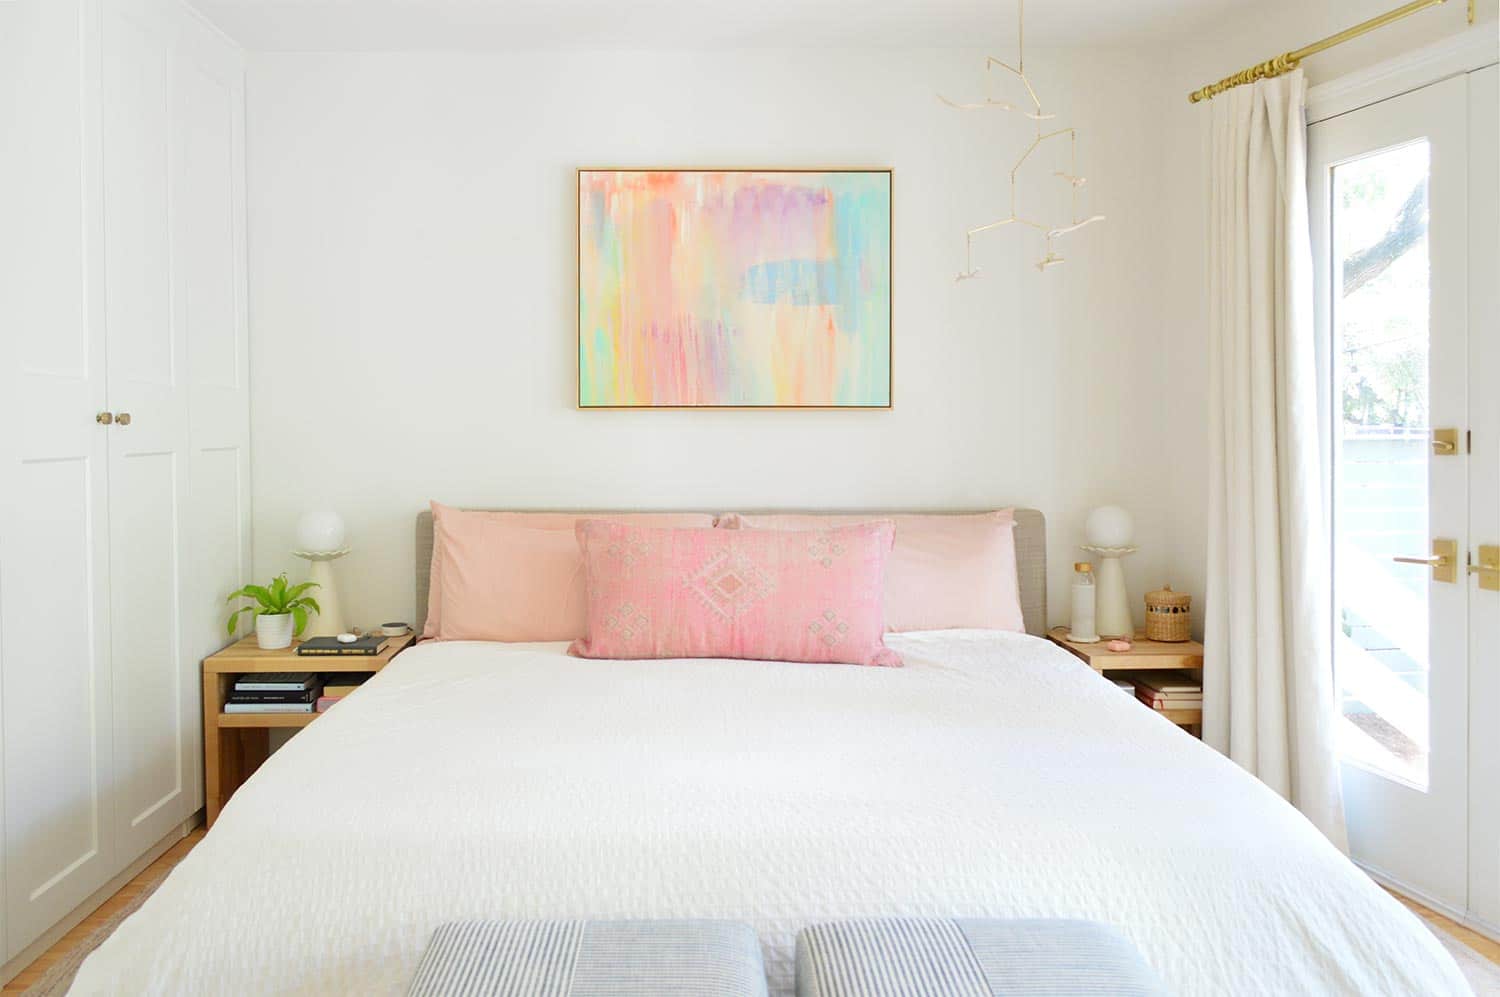 How To Fit A King-Size Bed Into A Small Bedroom | Young House Love